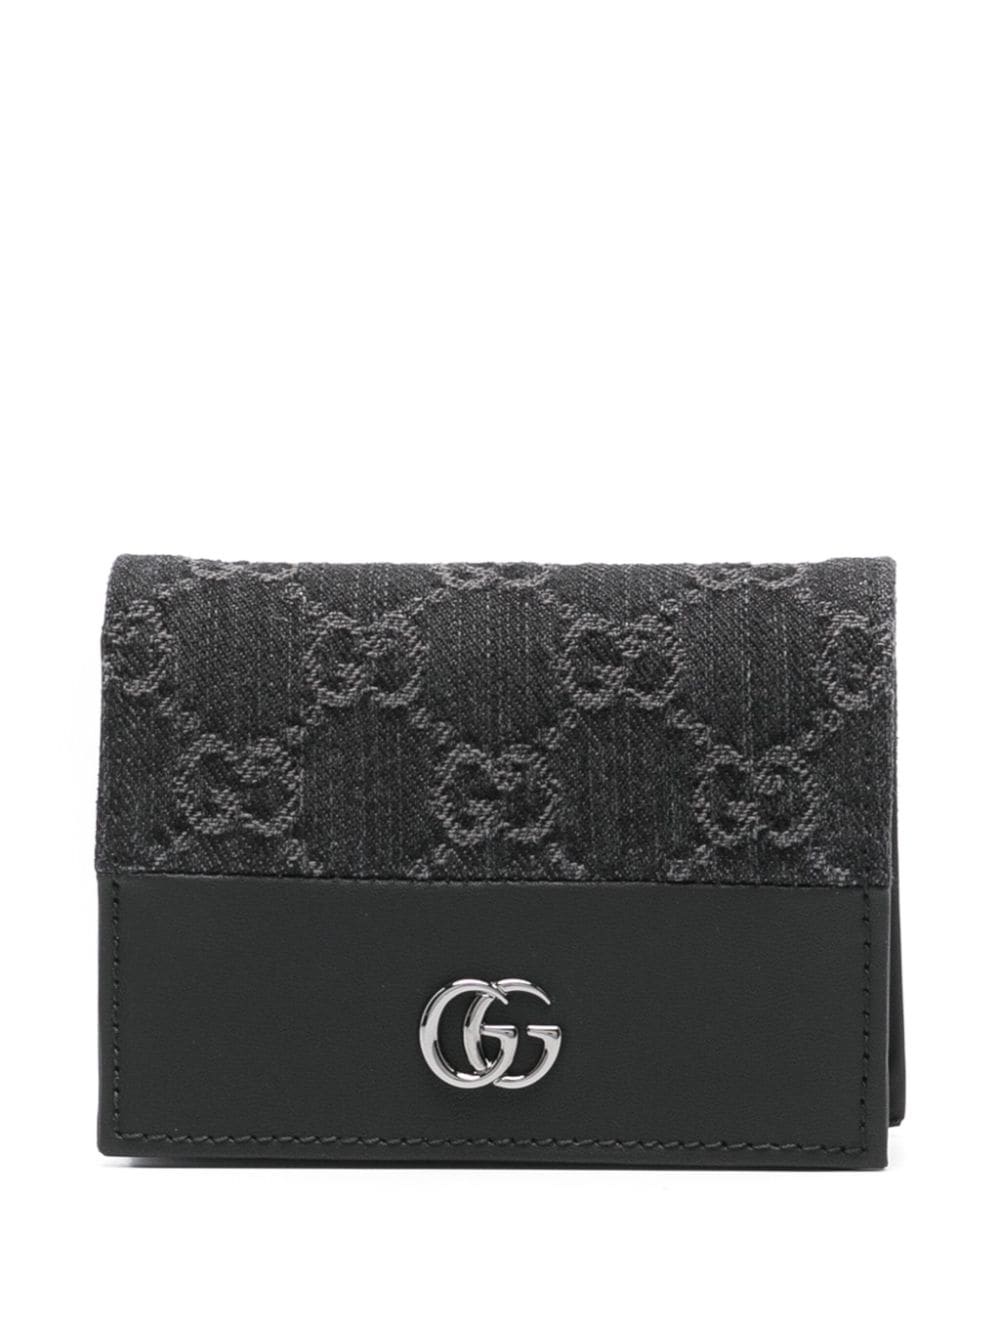 GG-supreme leather wallet - 1